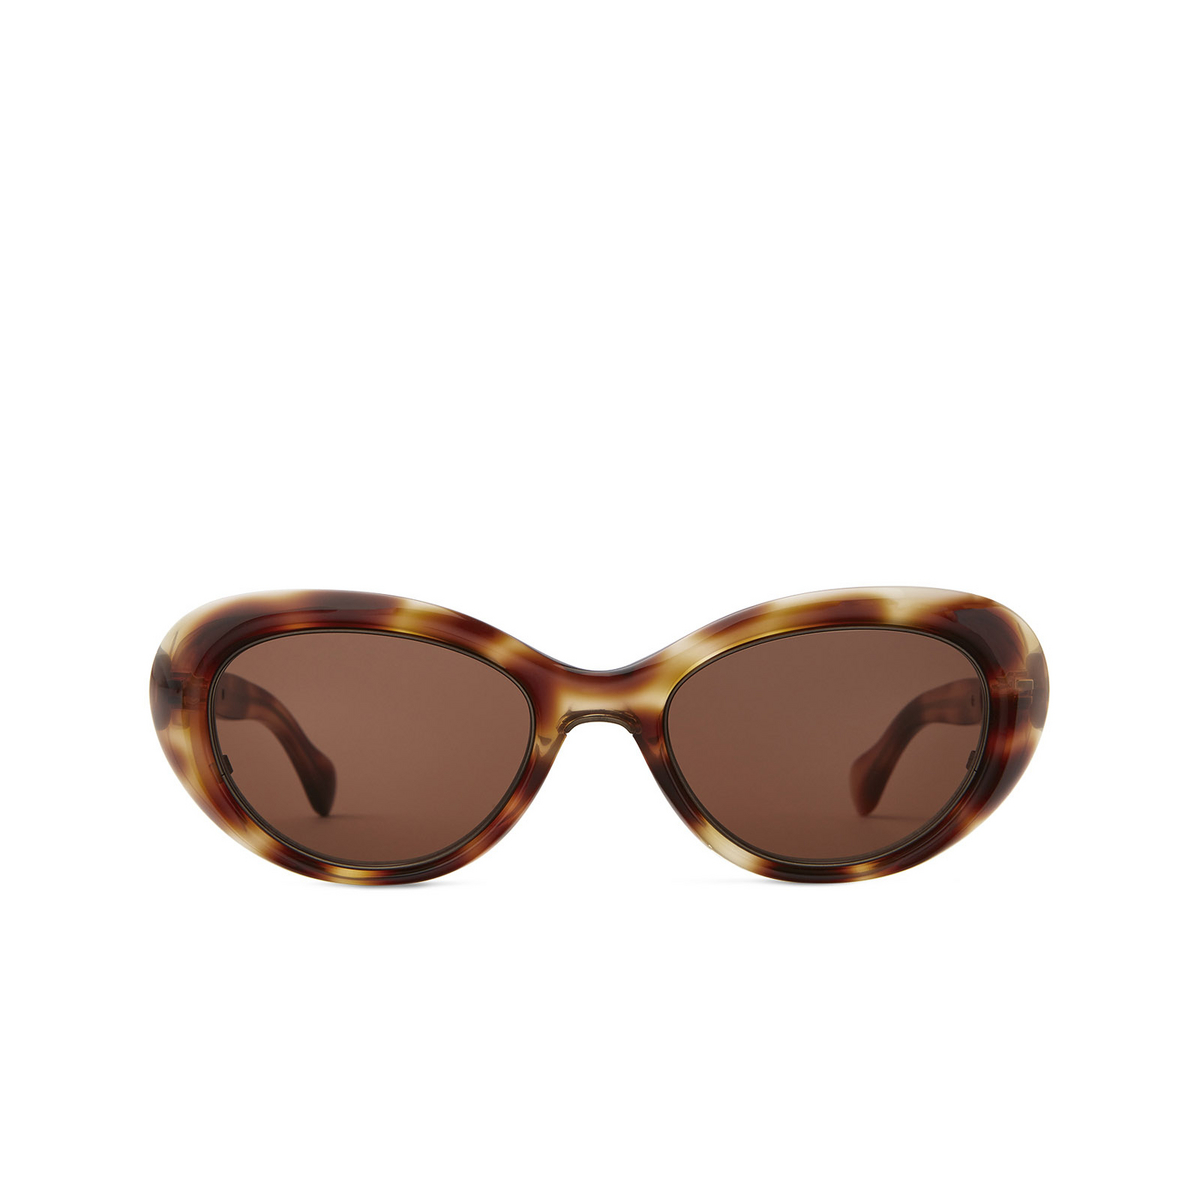 Mr. Leight SELMA S Sunglasses BLONT/MO Blondie Tortoise - front view